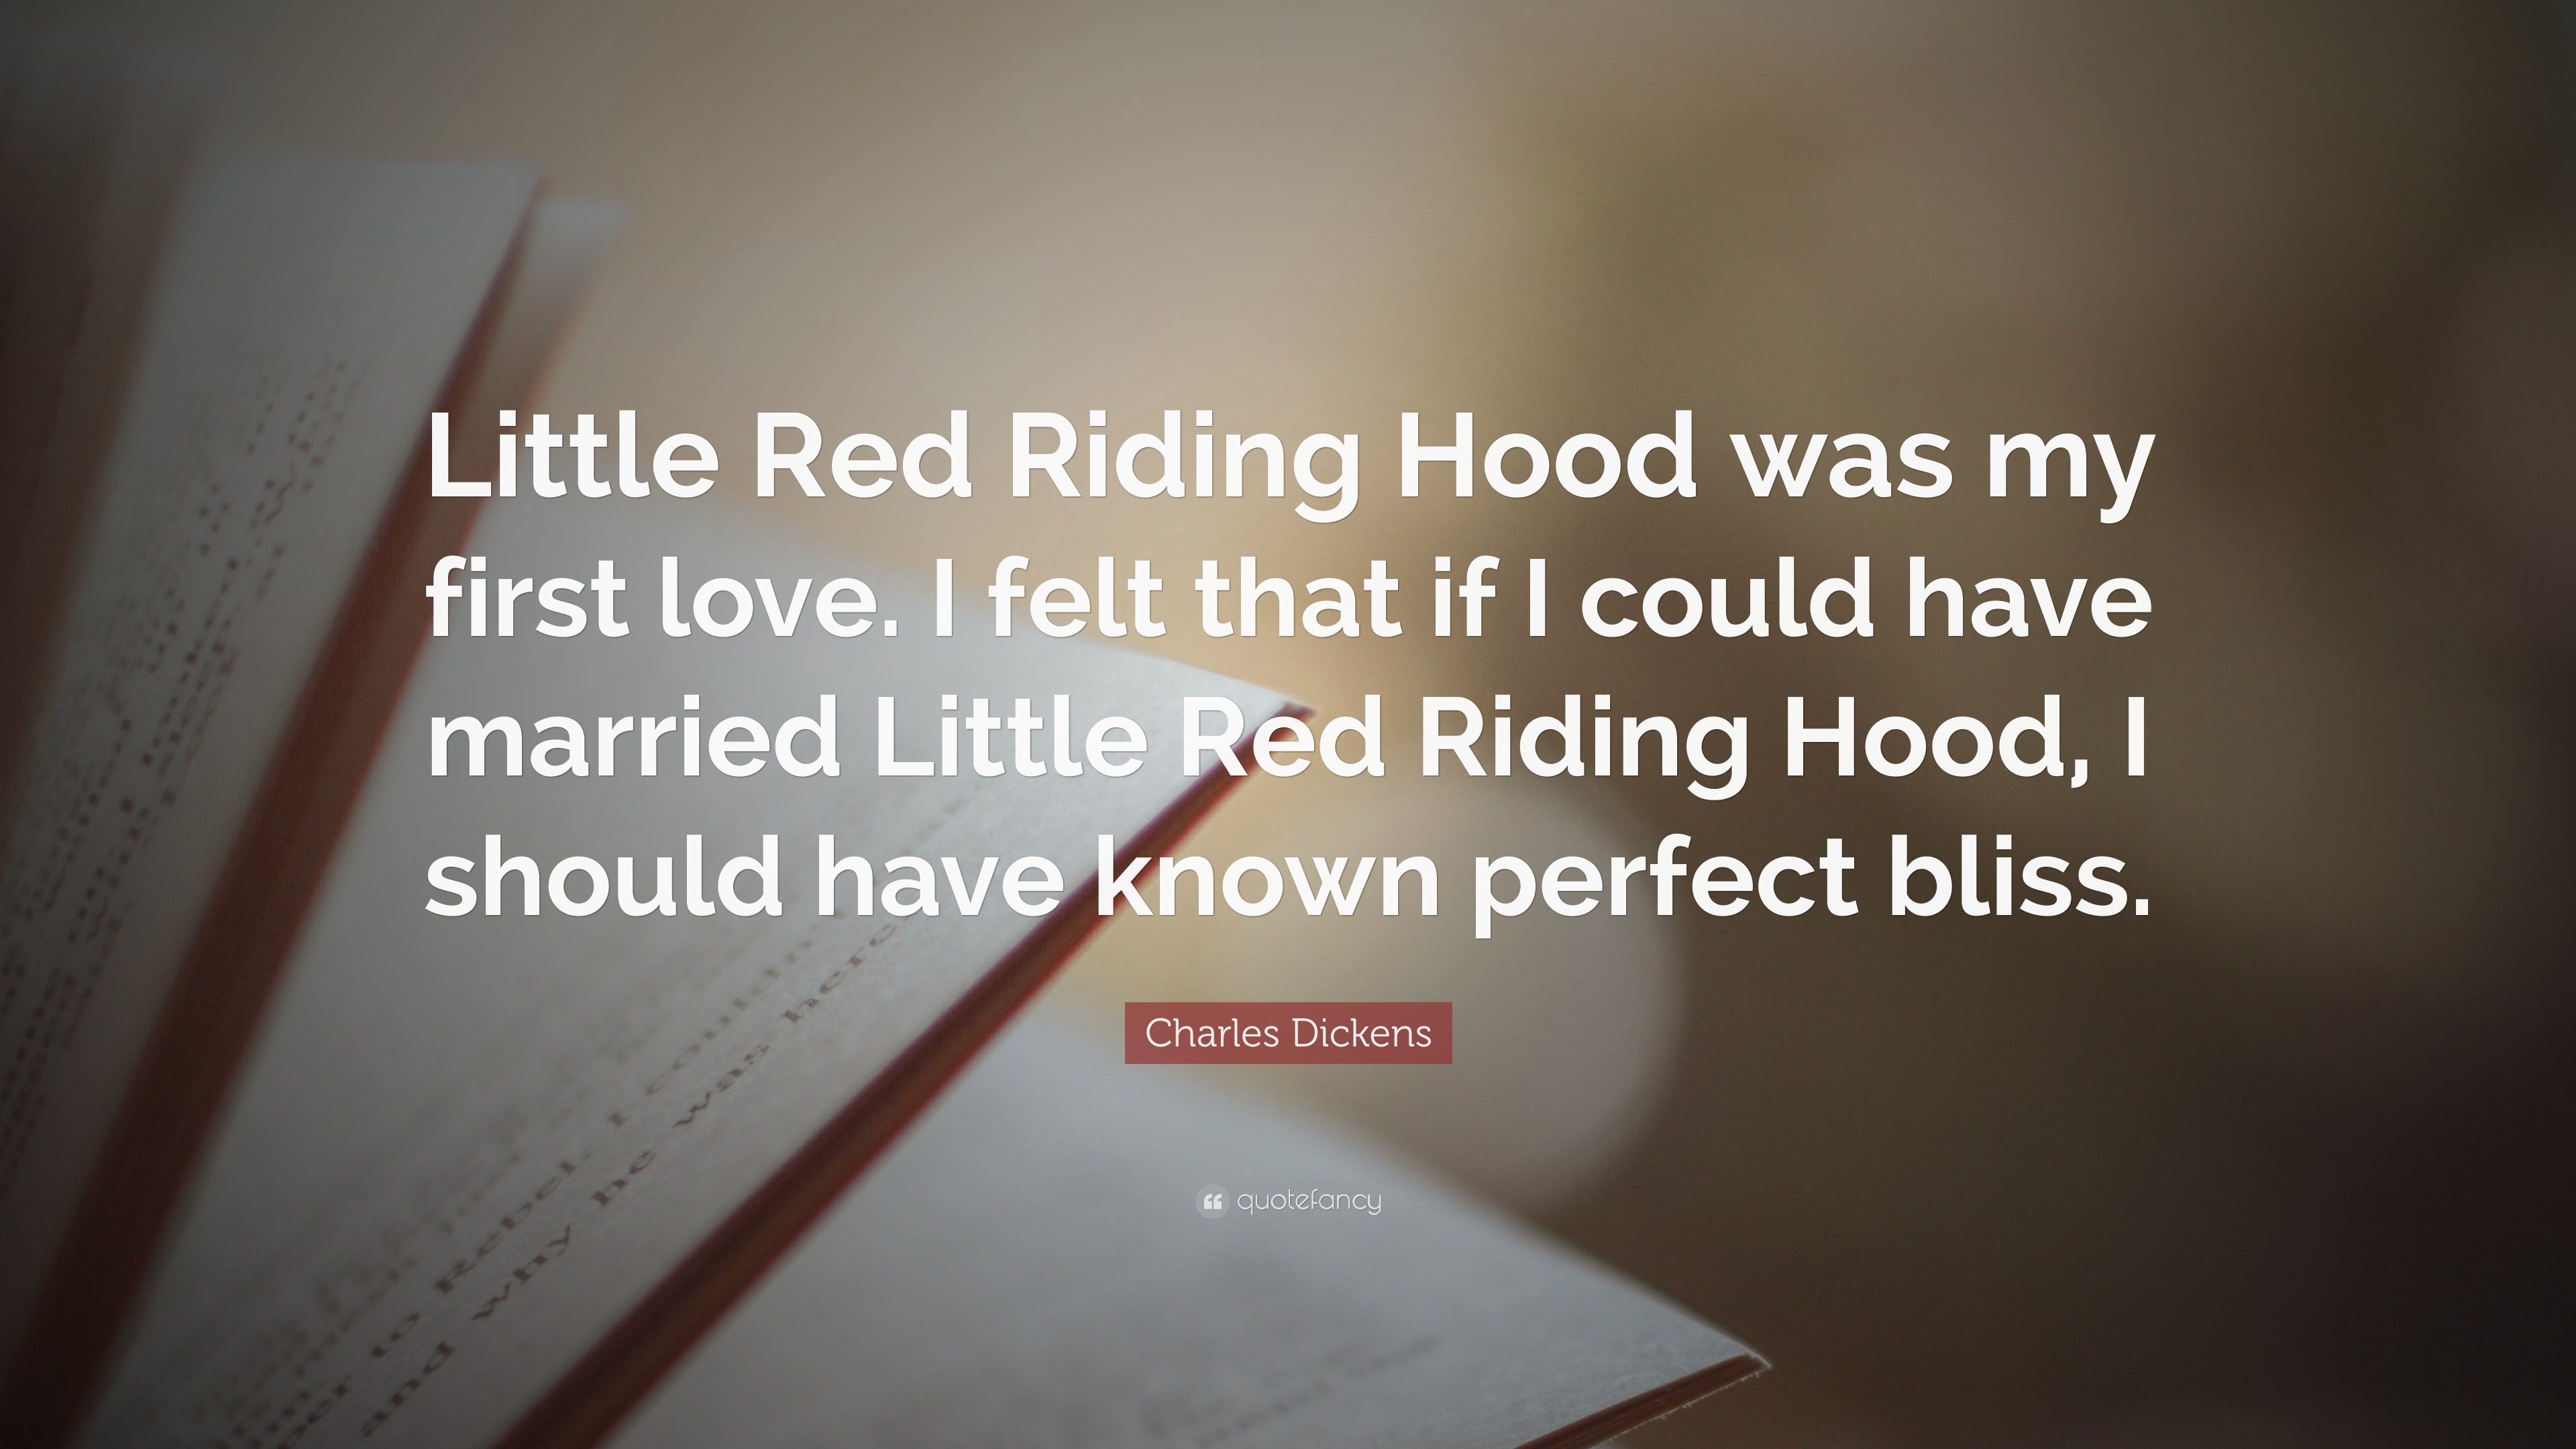 Charles Dickens Quote: “Little Riding Hood was my first love. I that if I could have married Little Red Riding I should have know...”